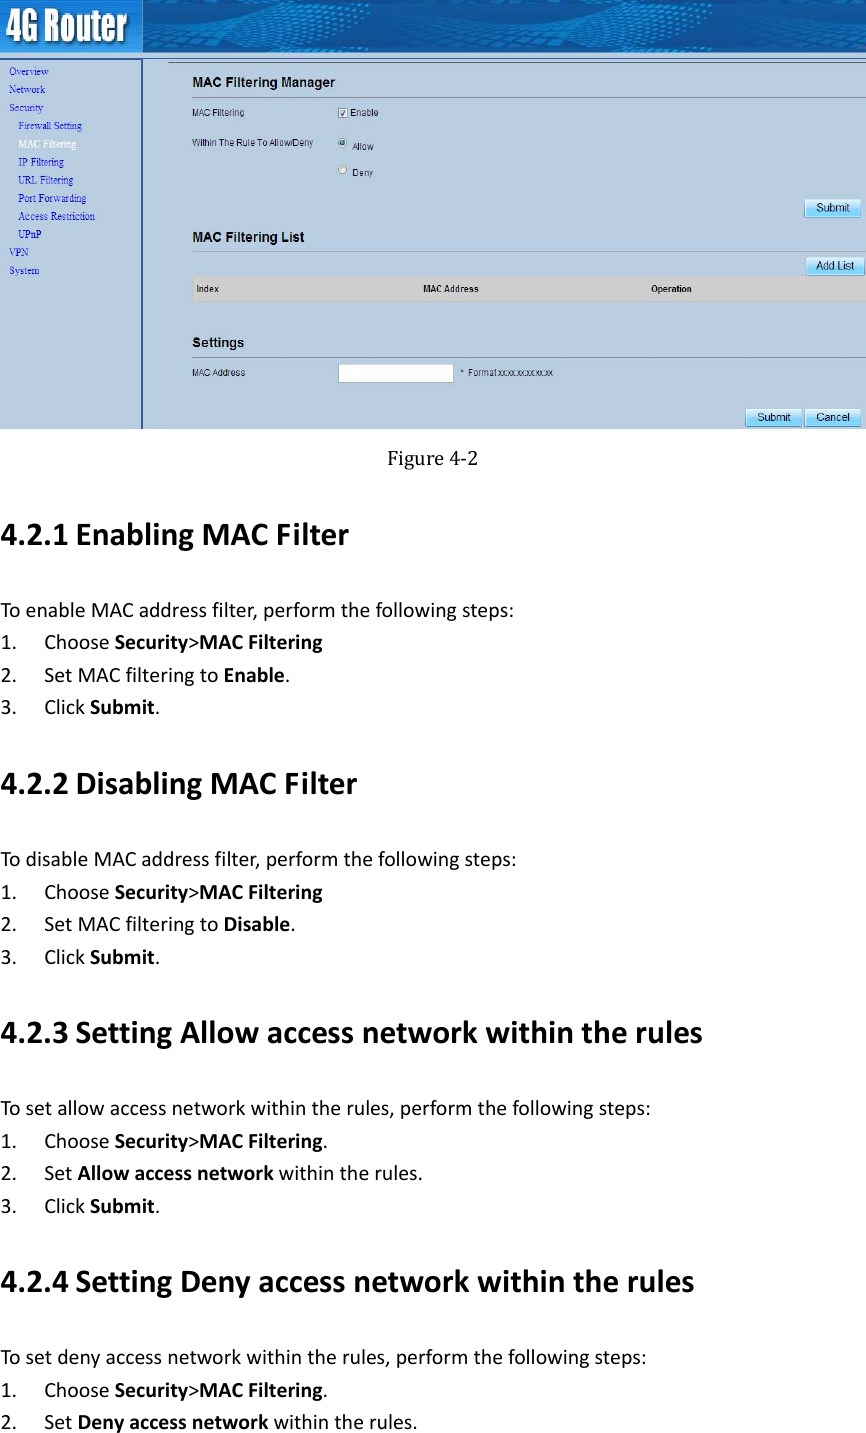   Figure4‐24.2.1 EnablingMACFilterToenableMACaddressfilter,performthefollowingsteps:1. ChooseSecurity&gt;MACFiltering2. SetMACfilteringtoEnable.3. ClickSubmit.4.2.2 DisablingMACFilterTodisableMACaddressfilter,performthefollowingsteps:1. ChooseSecurity&gt;MACFiltering2. SetMACfilteringtoDisable.3. ClickSubmit.4.2.3 SettingAllowaccessnetworkwithintherulesTosetallowaccessnetworkwithintherules,performthefollowingsteps:1. ChooseSecurity&gt;MACFiltering.2. SetAllowaccessnetworkwithintherules.3. ClickSubmit.4.2.4 SettingDenyaccessnetworkwithintherulesTosetdenyaccessnetworkwithintherules,performthefollowingsteps:1. ChooseSecurity&gt;MACFiltering.2. SetDenyaccessnetworkwithintherules.